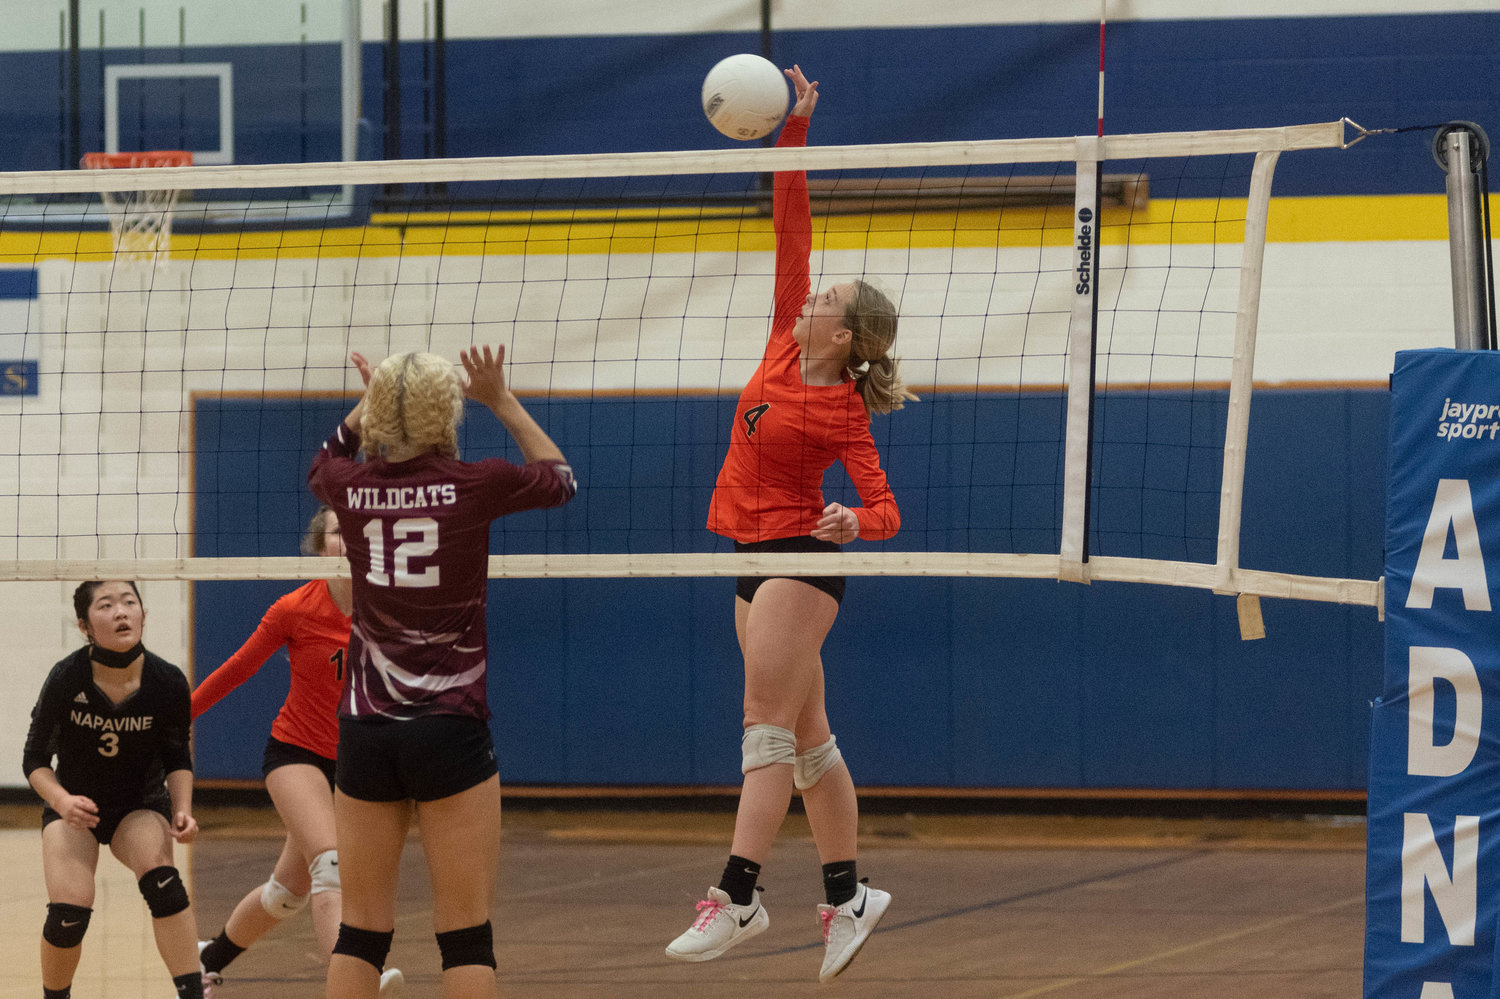 FILE PHOTO -- Napavine sophomore outside hitter Grace Gall goes up for a spike in the opening round of the District 4 Tournament in Adna Oct. 30.